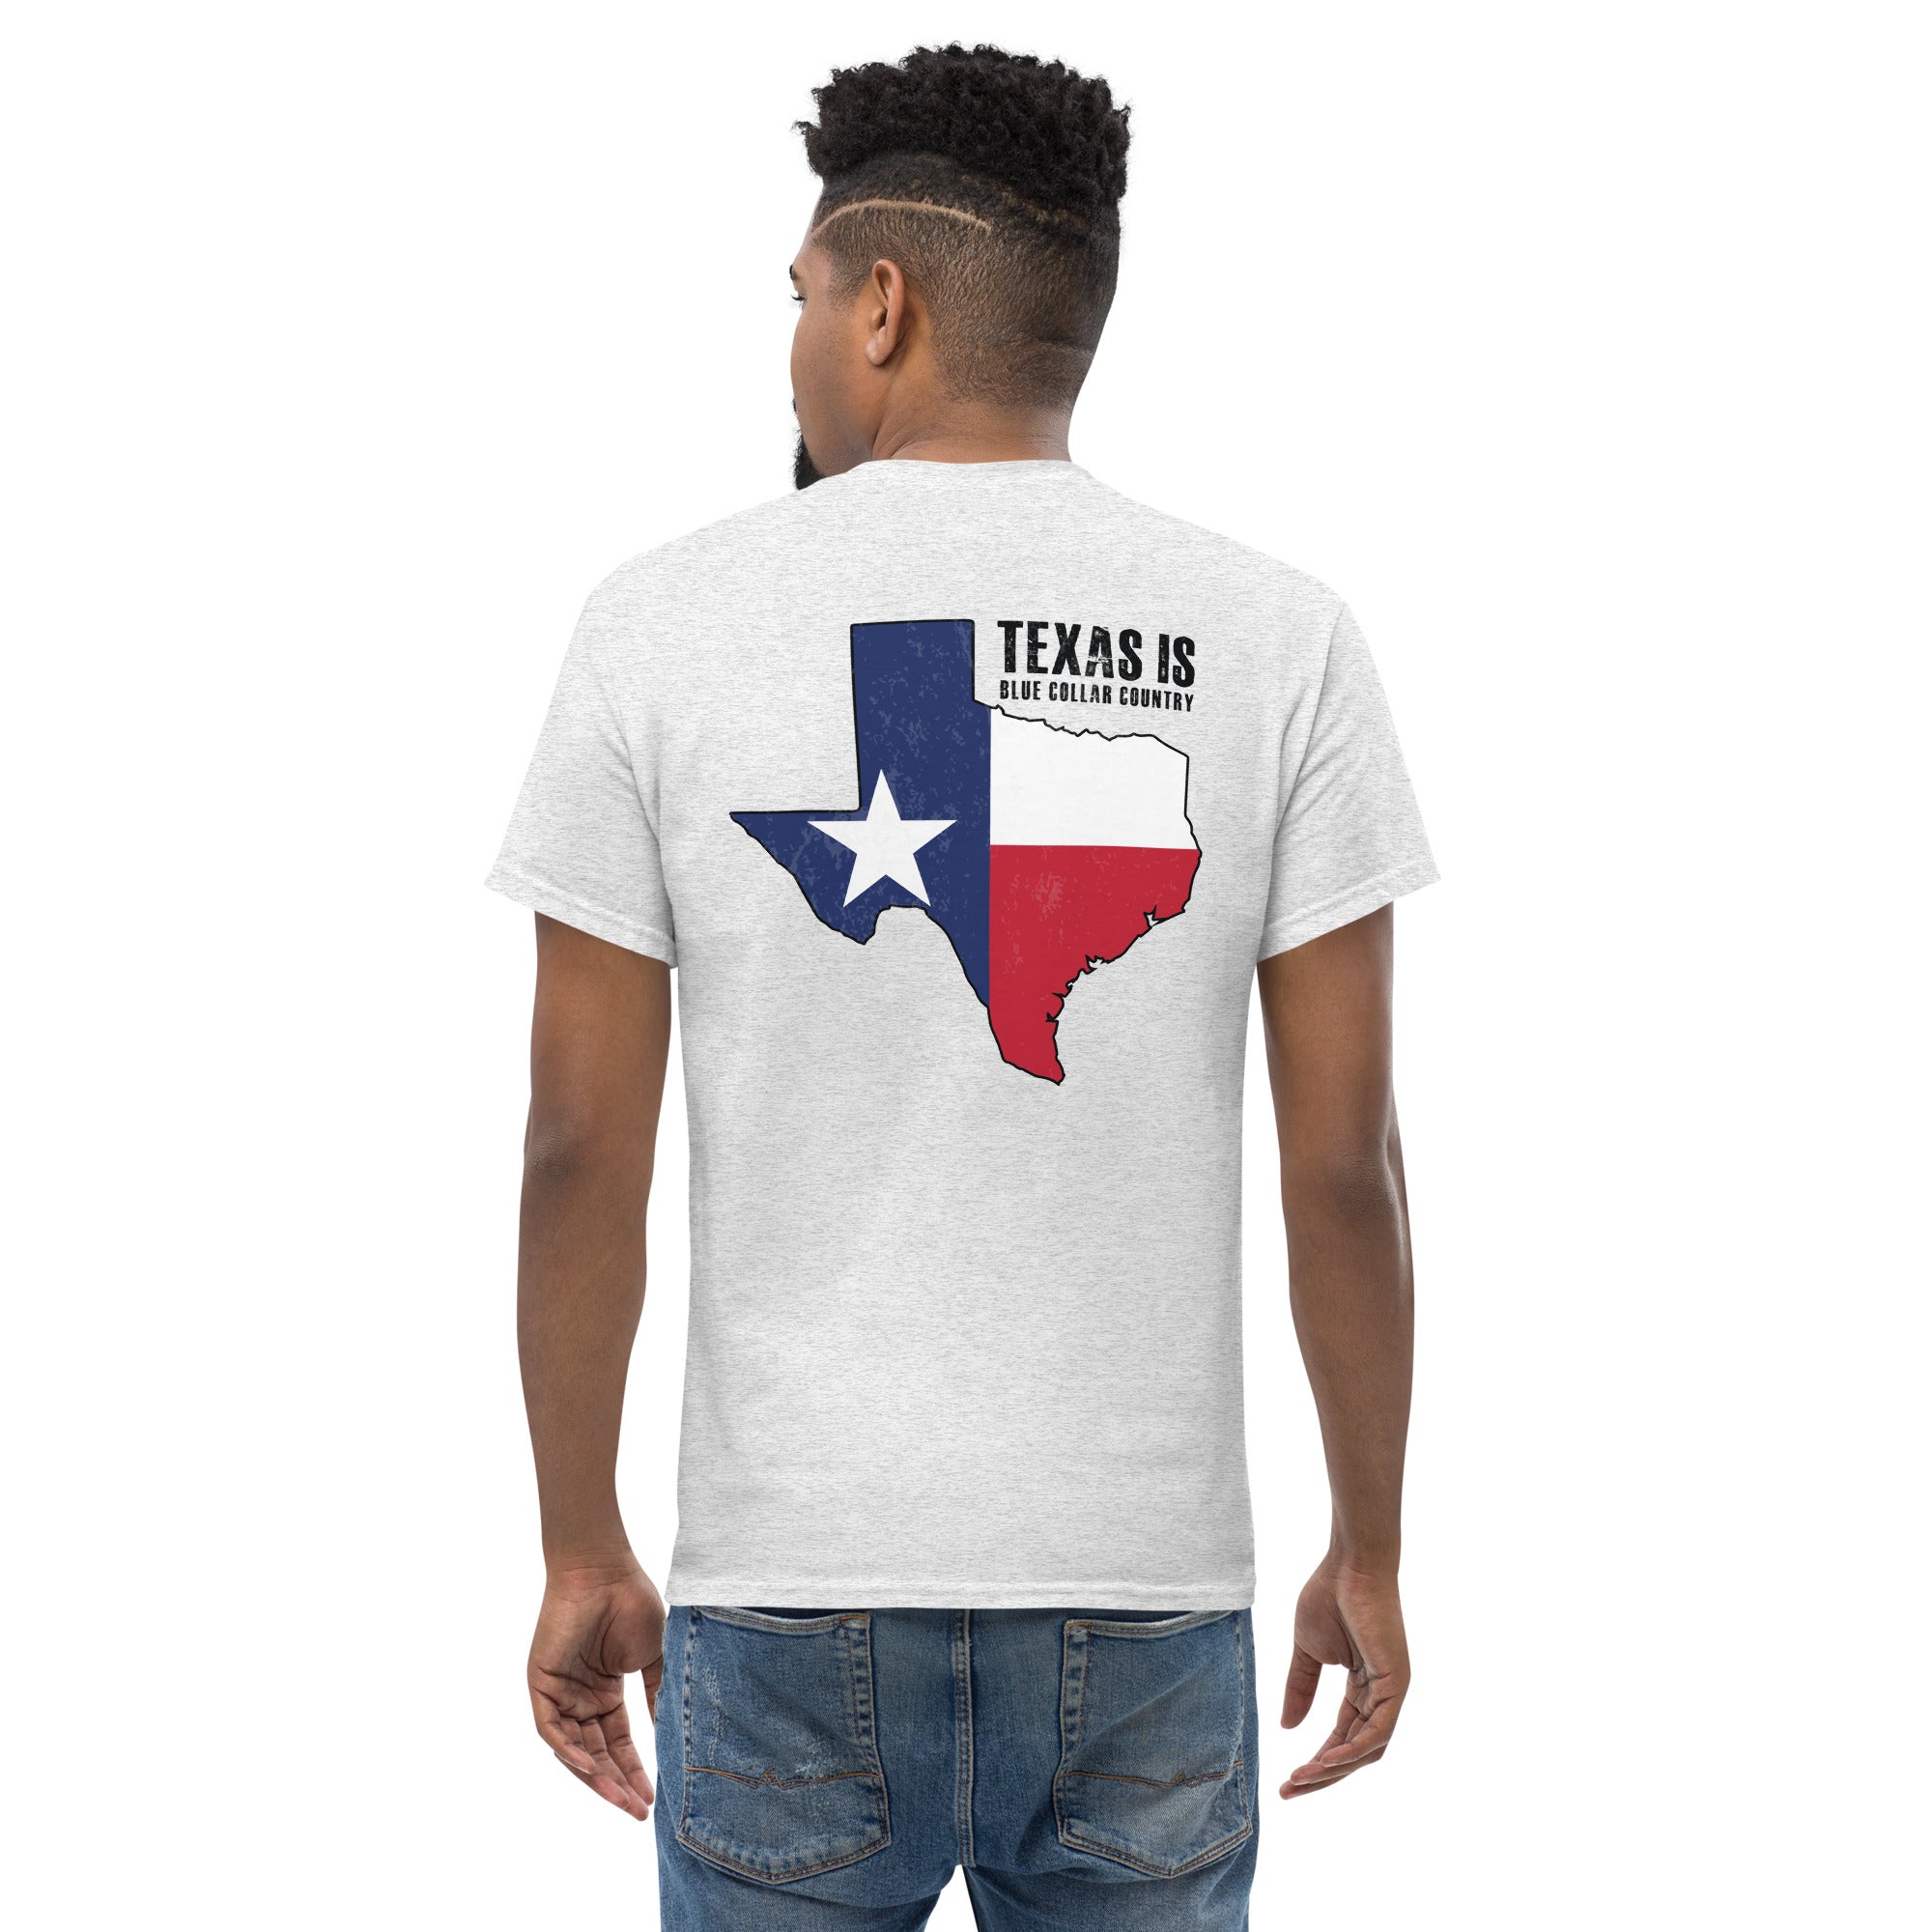 Texas is Blue Collar Country  I  Men's classic tee